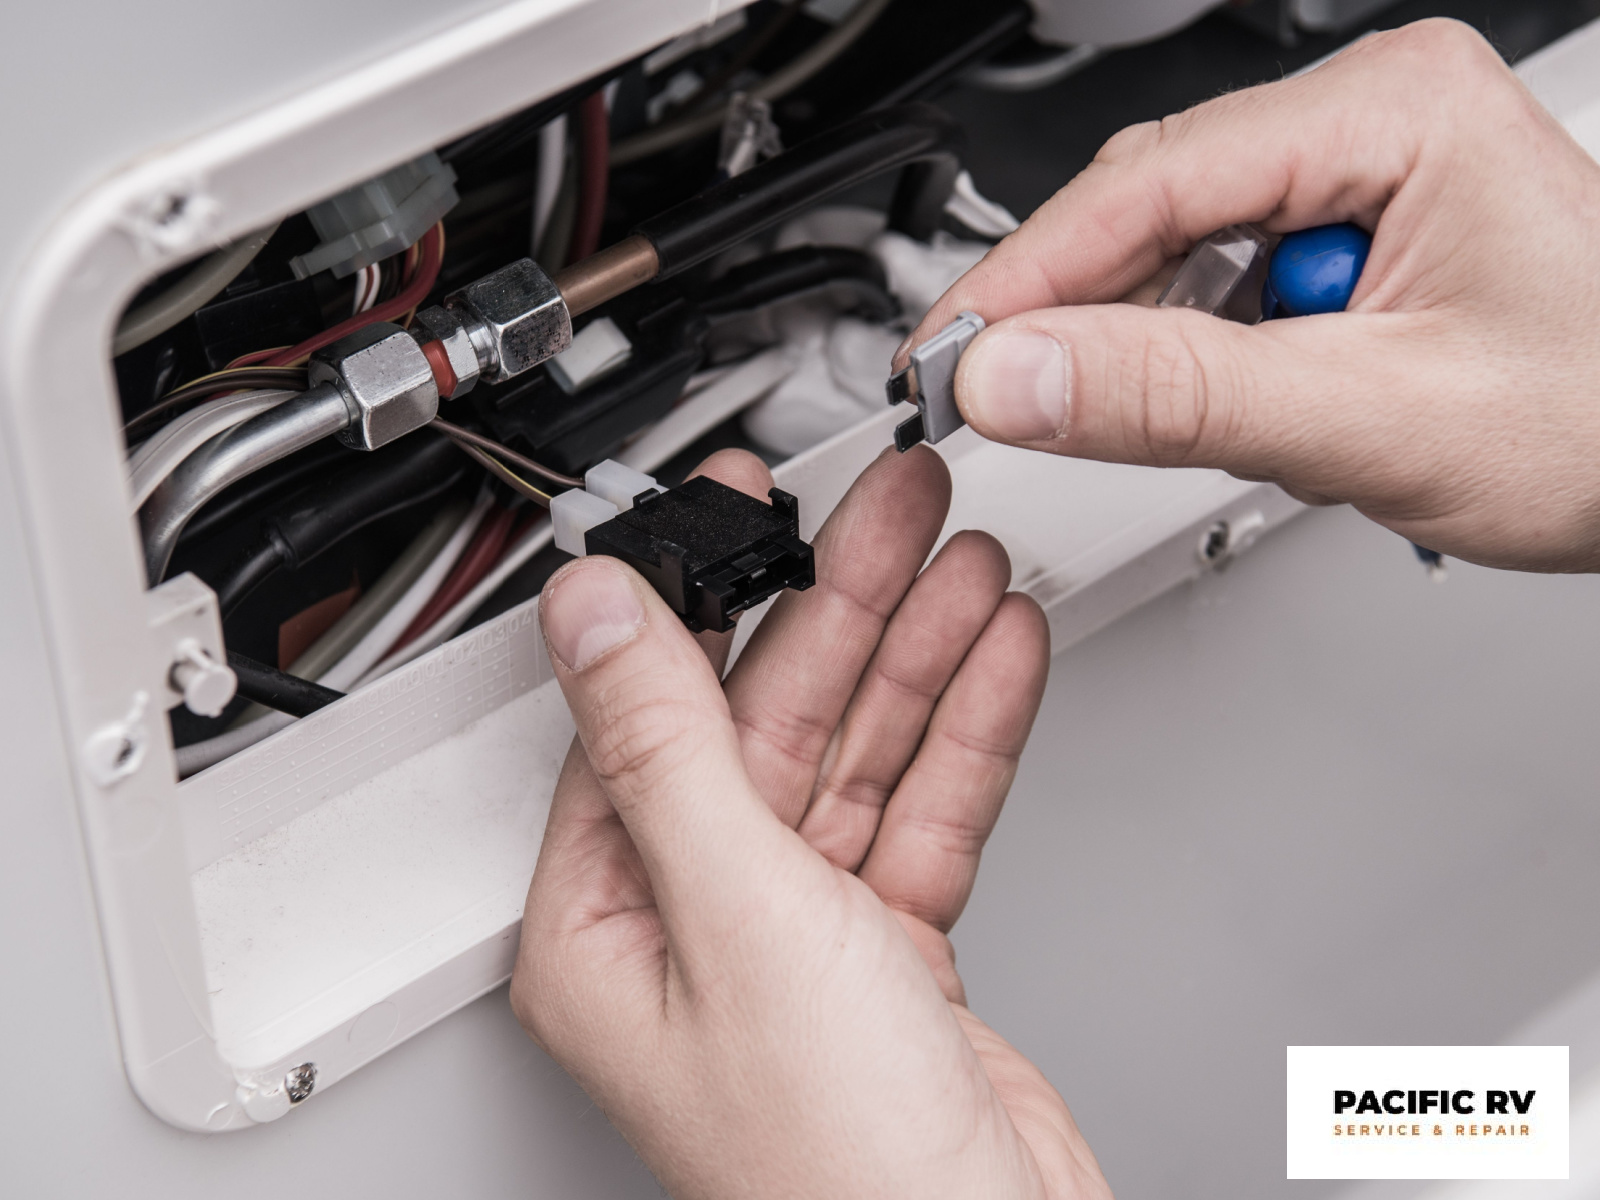 Trust The Pros at Pacific RV Service & Repair For Your Electrical System Repair In Monroe